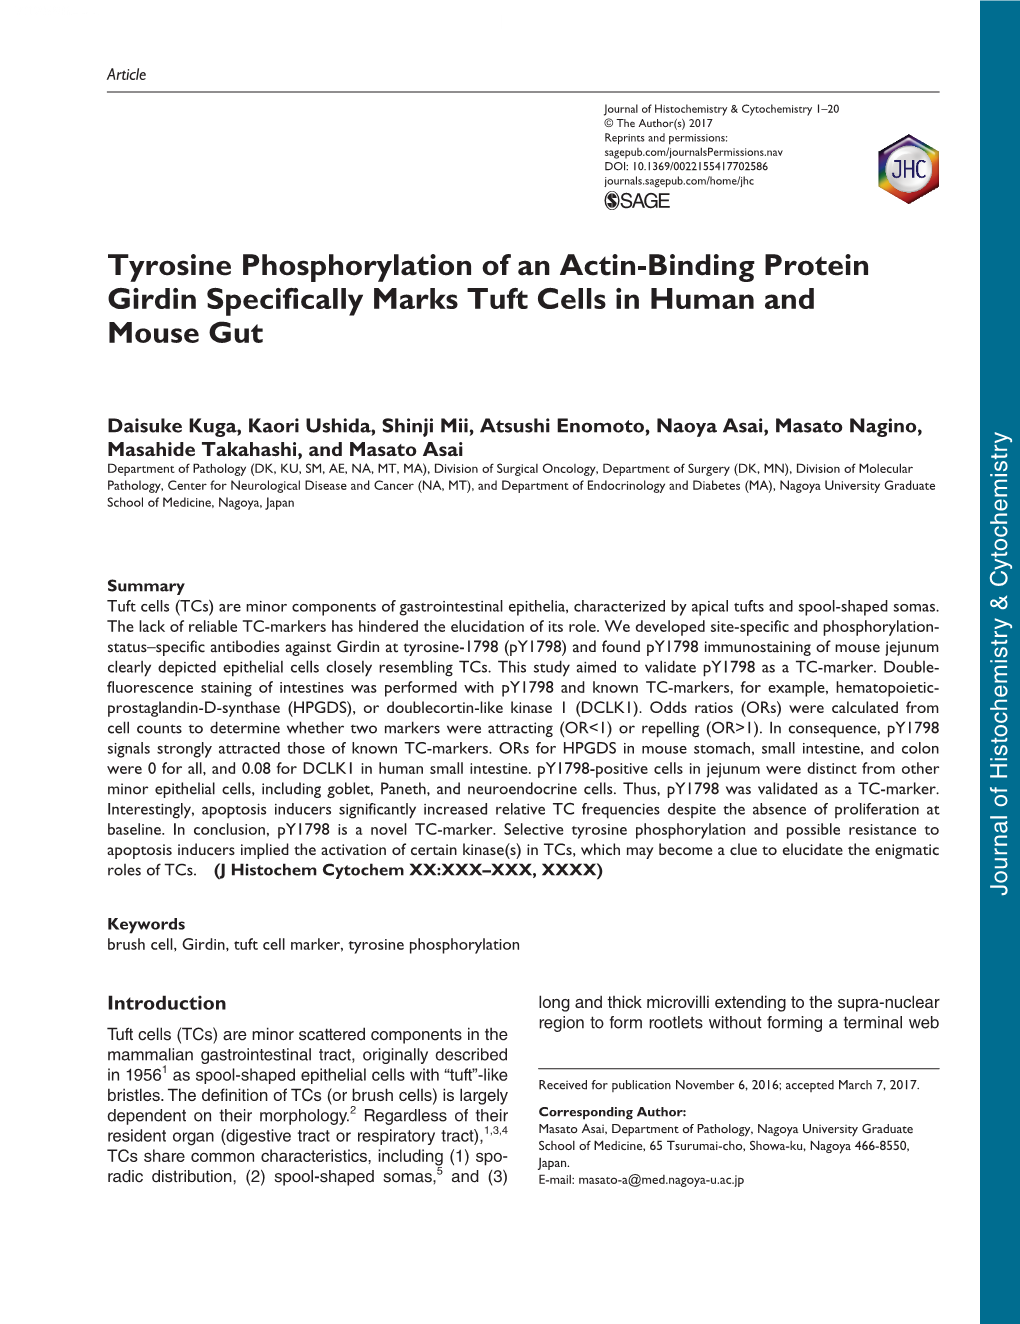 Tyrosine Phosphorylation of an Actin-Binding Protein Girdin Specifically Marks Tuft Cells in Human and Mouse Gut